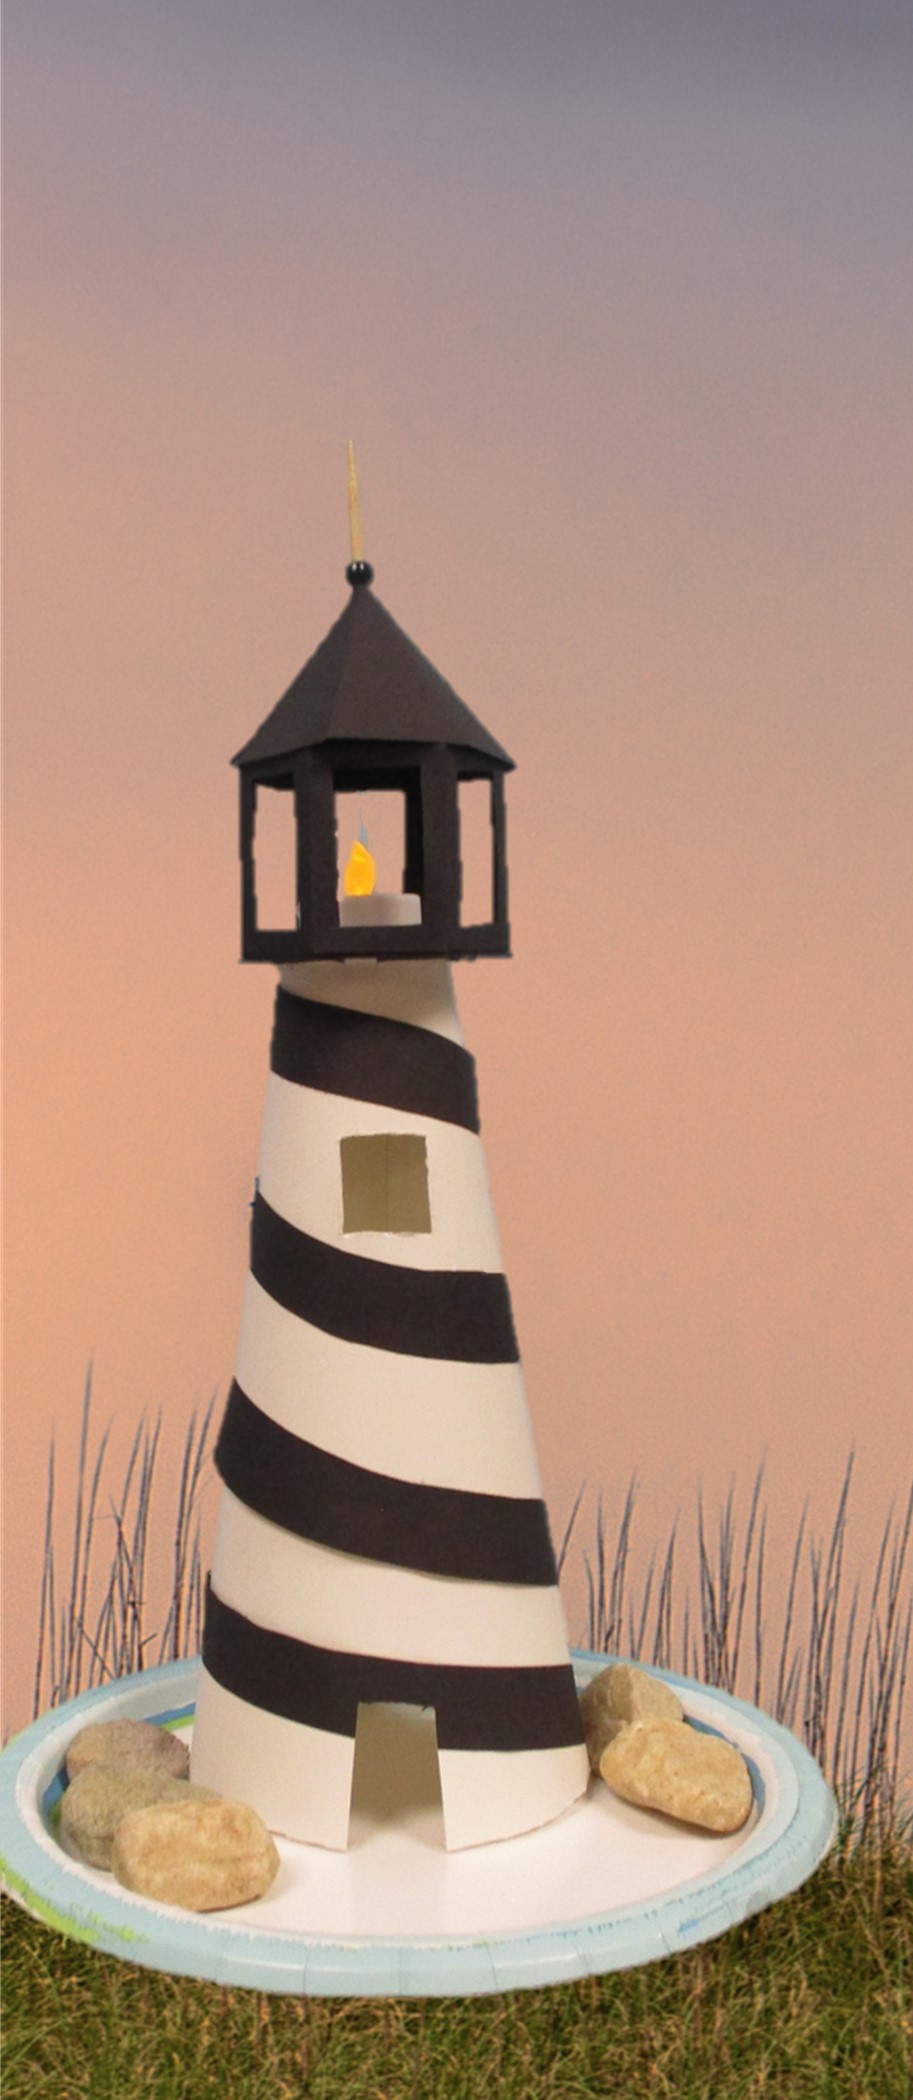 Paper lighthouse on a plate with rocks on a photo background.